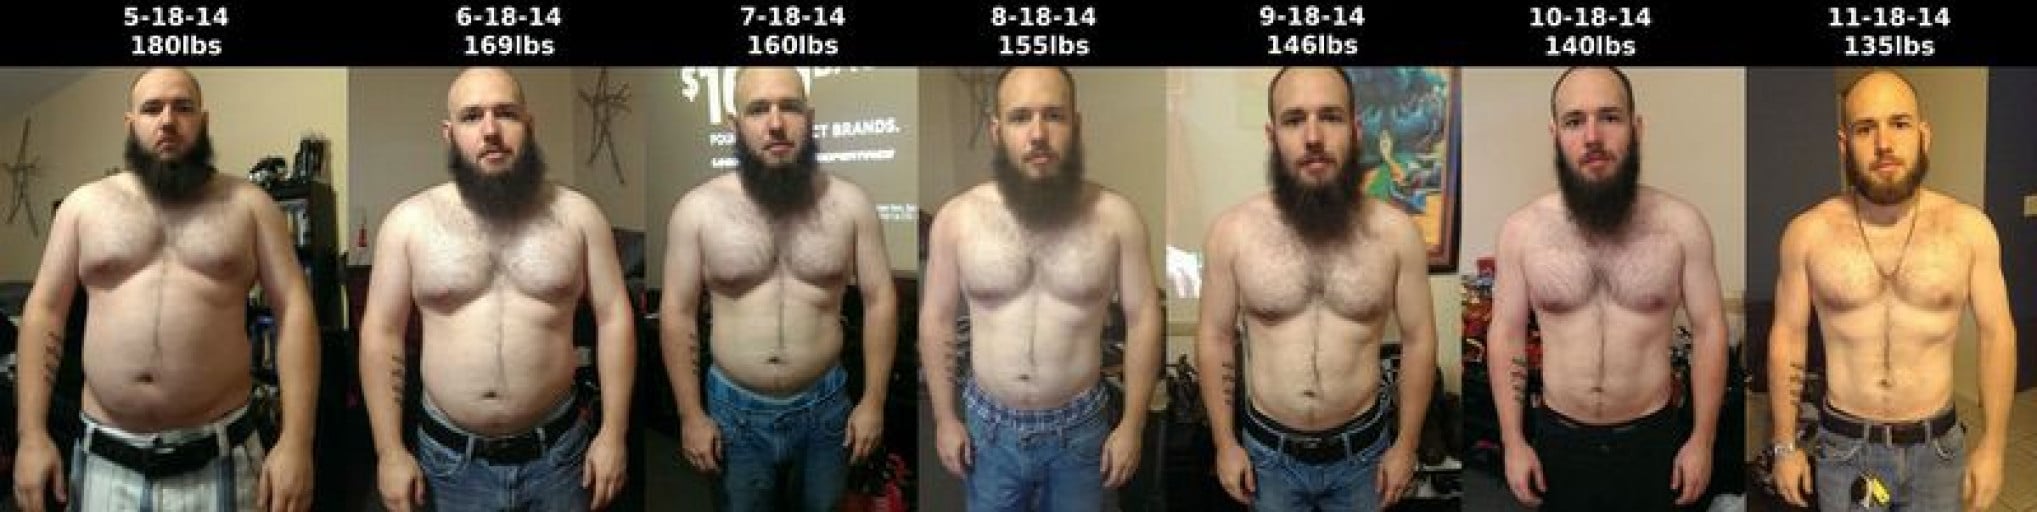 A before and after photo of a 5'3" male showing a weight reduction from 180 pounds to 135 pounds. A net loss of 45 pounds.